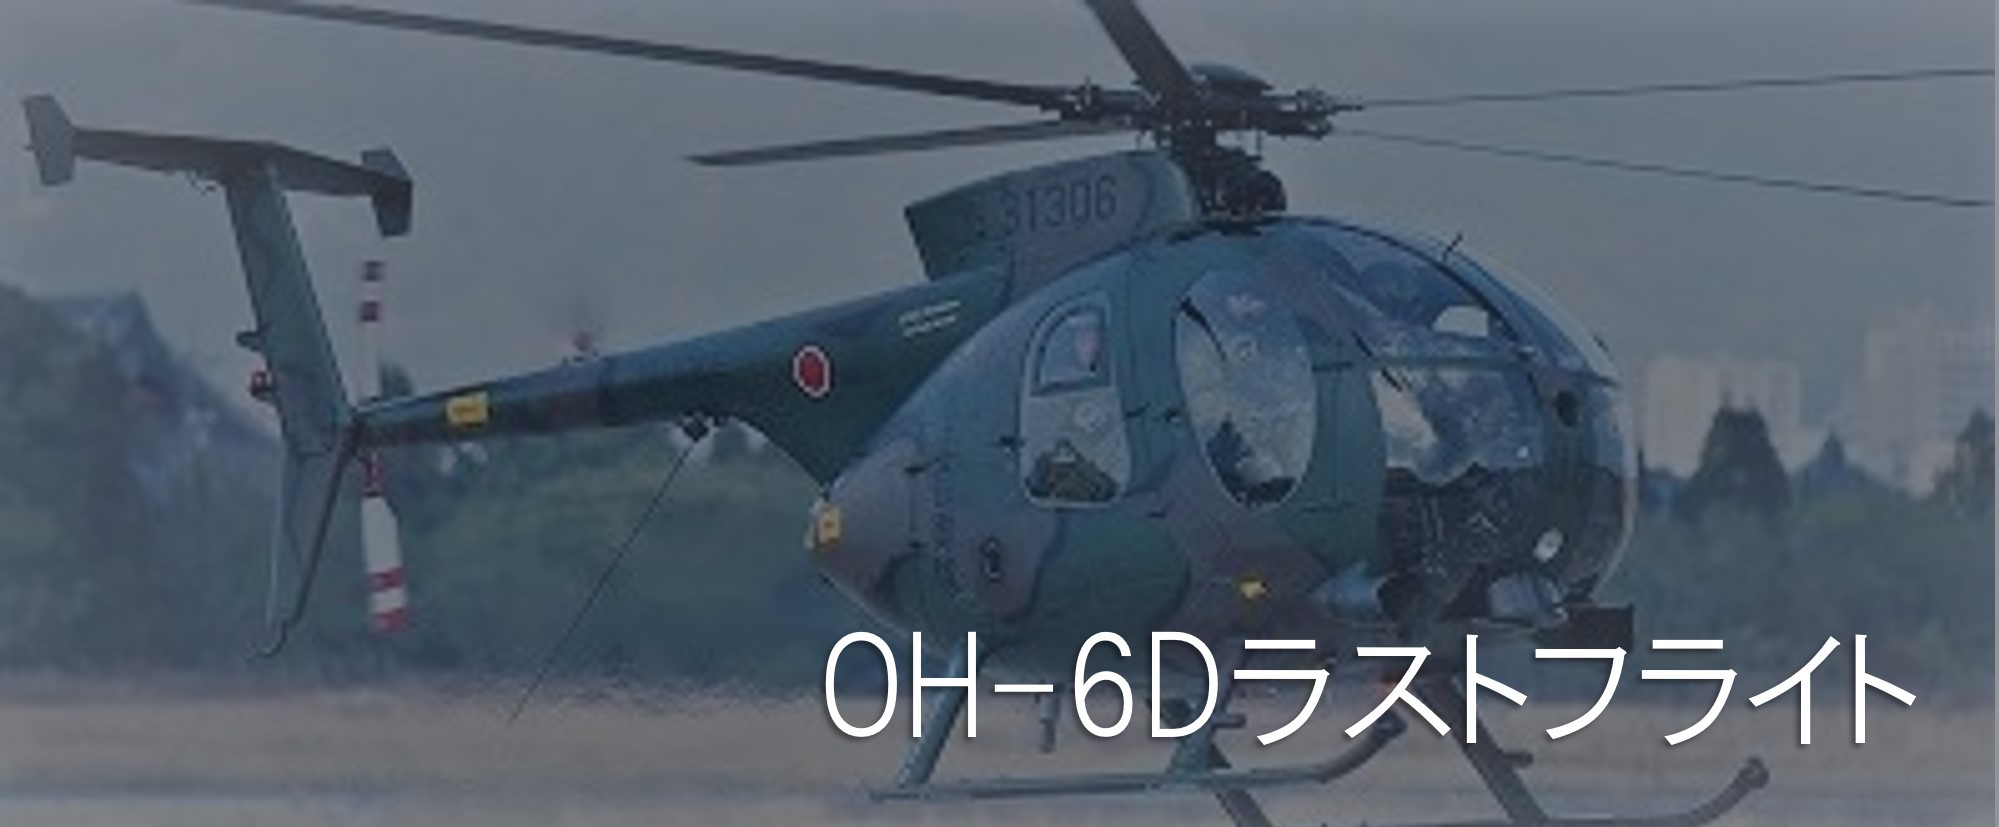 OH-6Dラストフライト　トップ画像